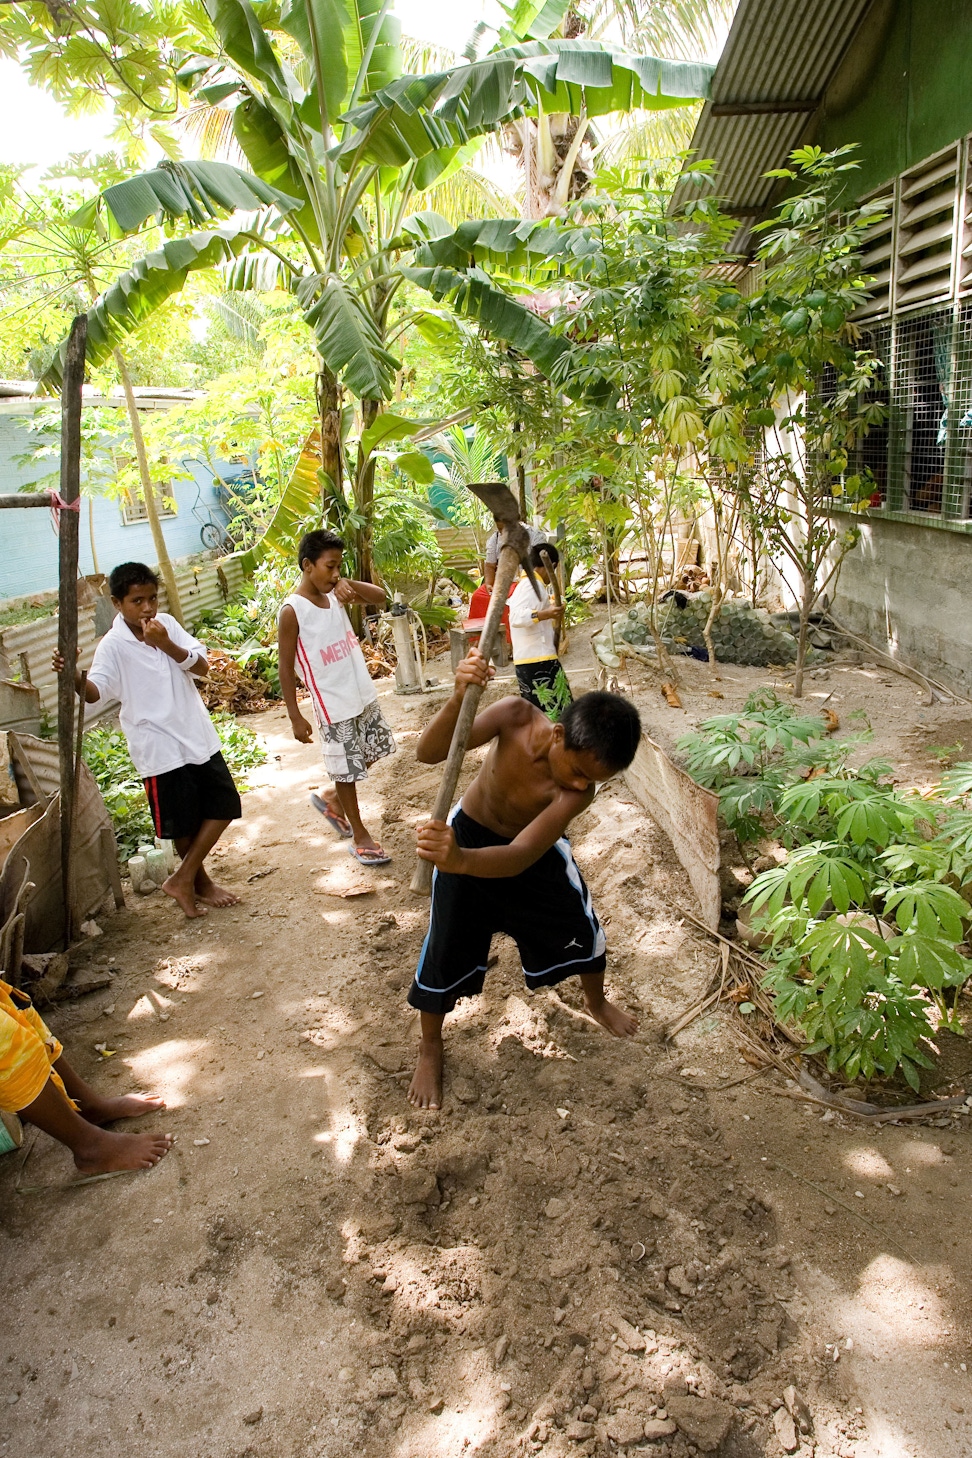 A group of youth making a garden as part of a service project for their Junior Youth Spiritual Empowerment Program in South Tarawa, Kiribati